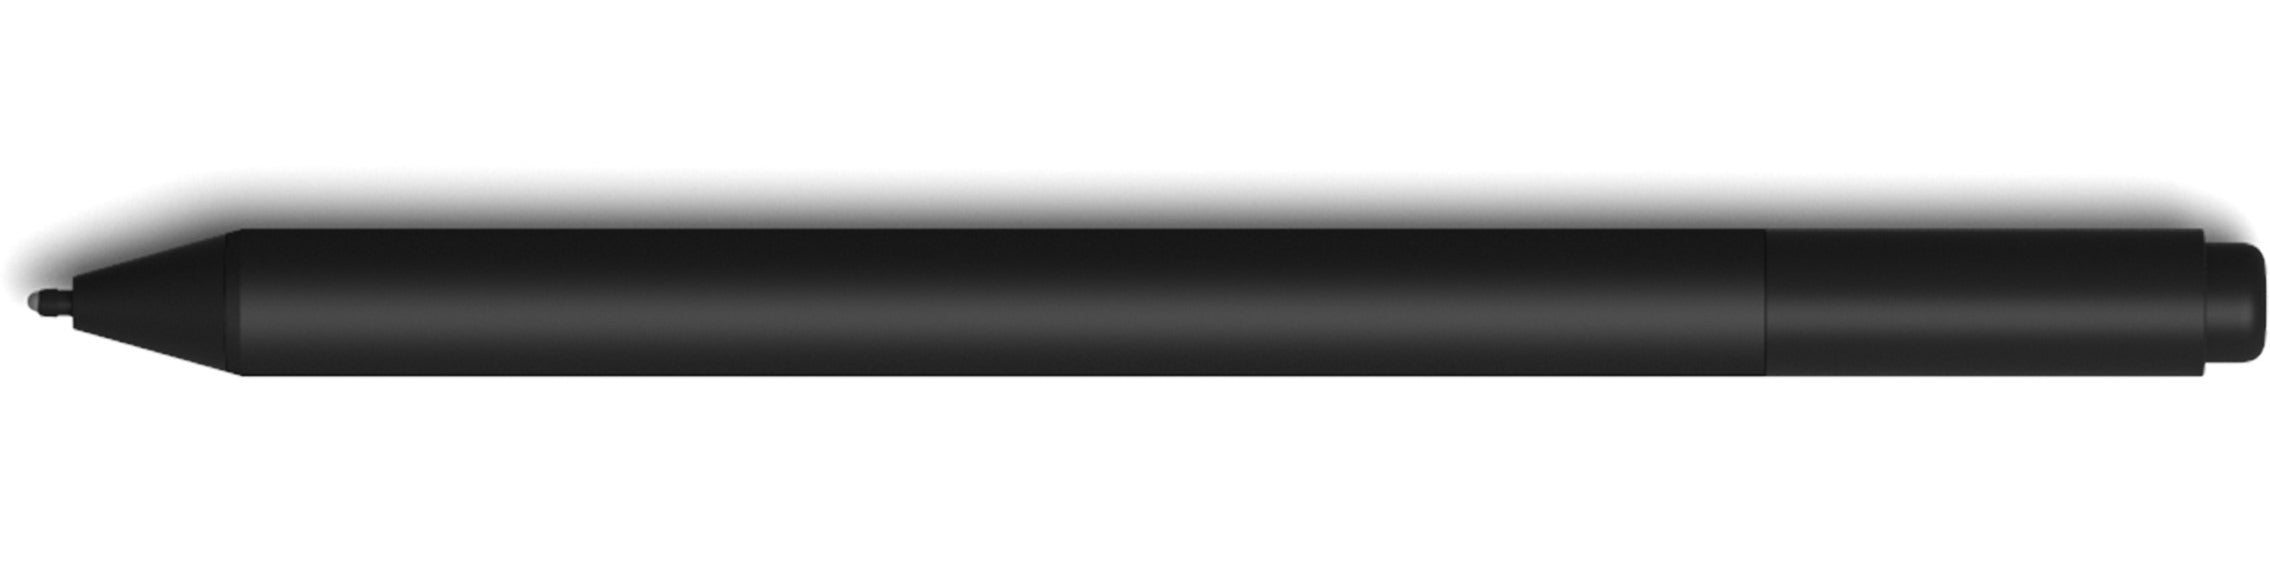 Microsoft Surface Pen M1776 - Stylus - 2 buttons - wireless - Bluetooth 4.0 - black - commercial